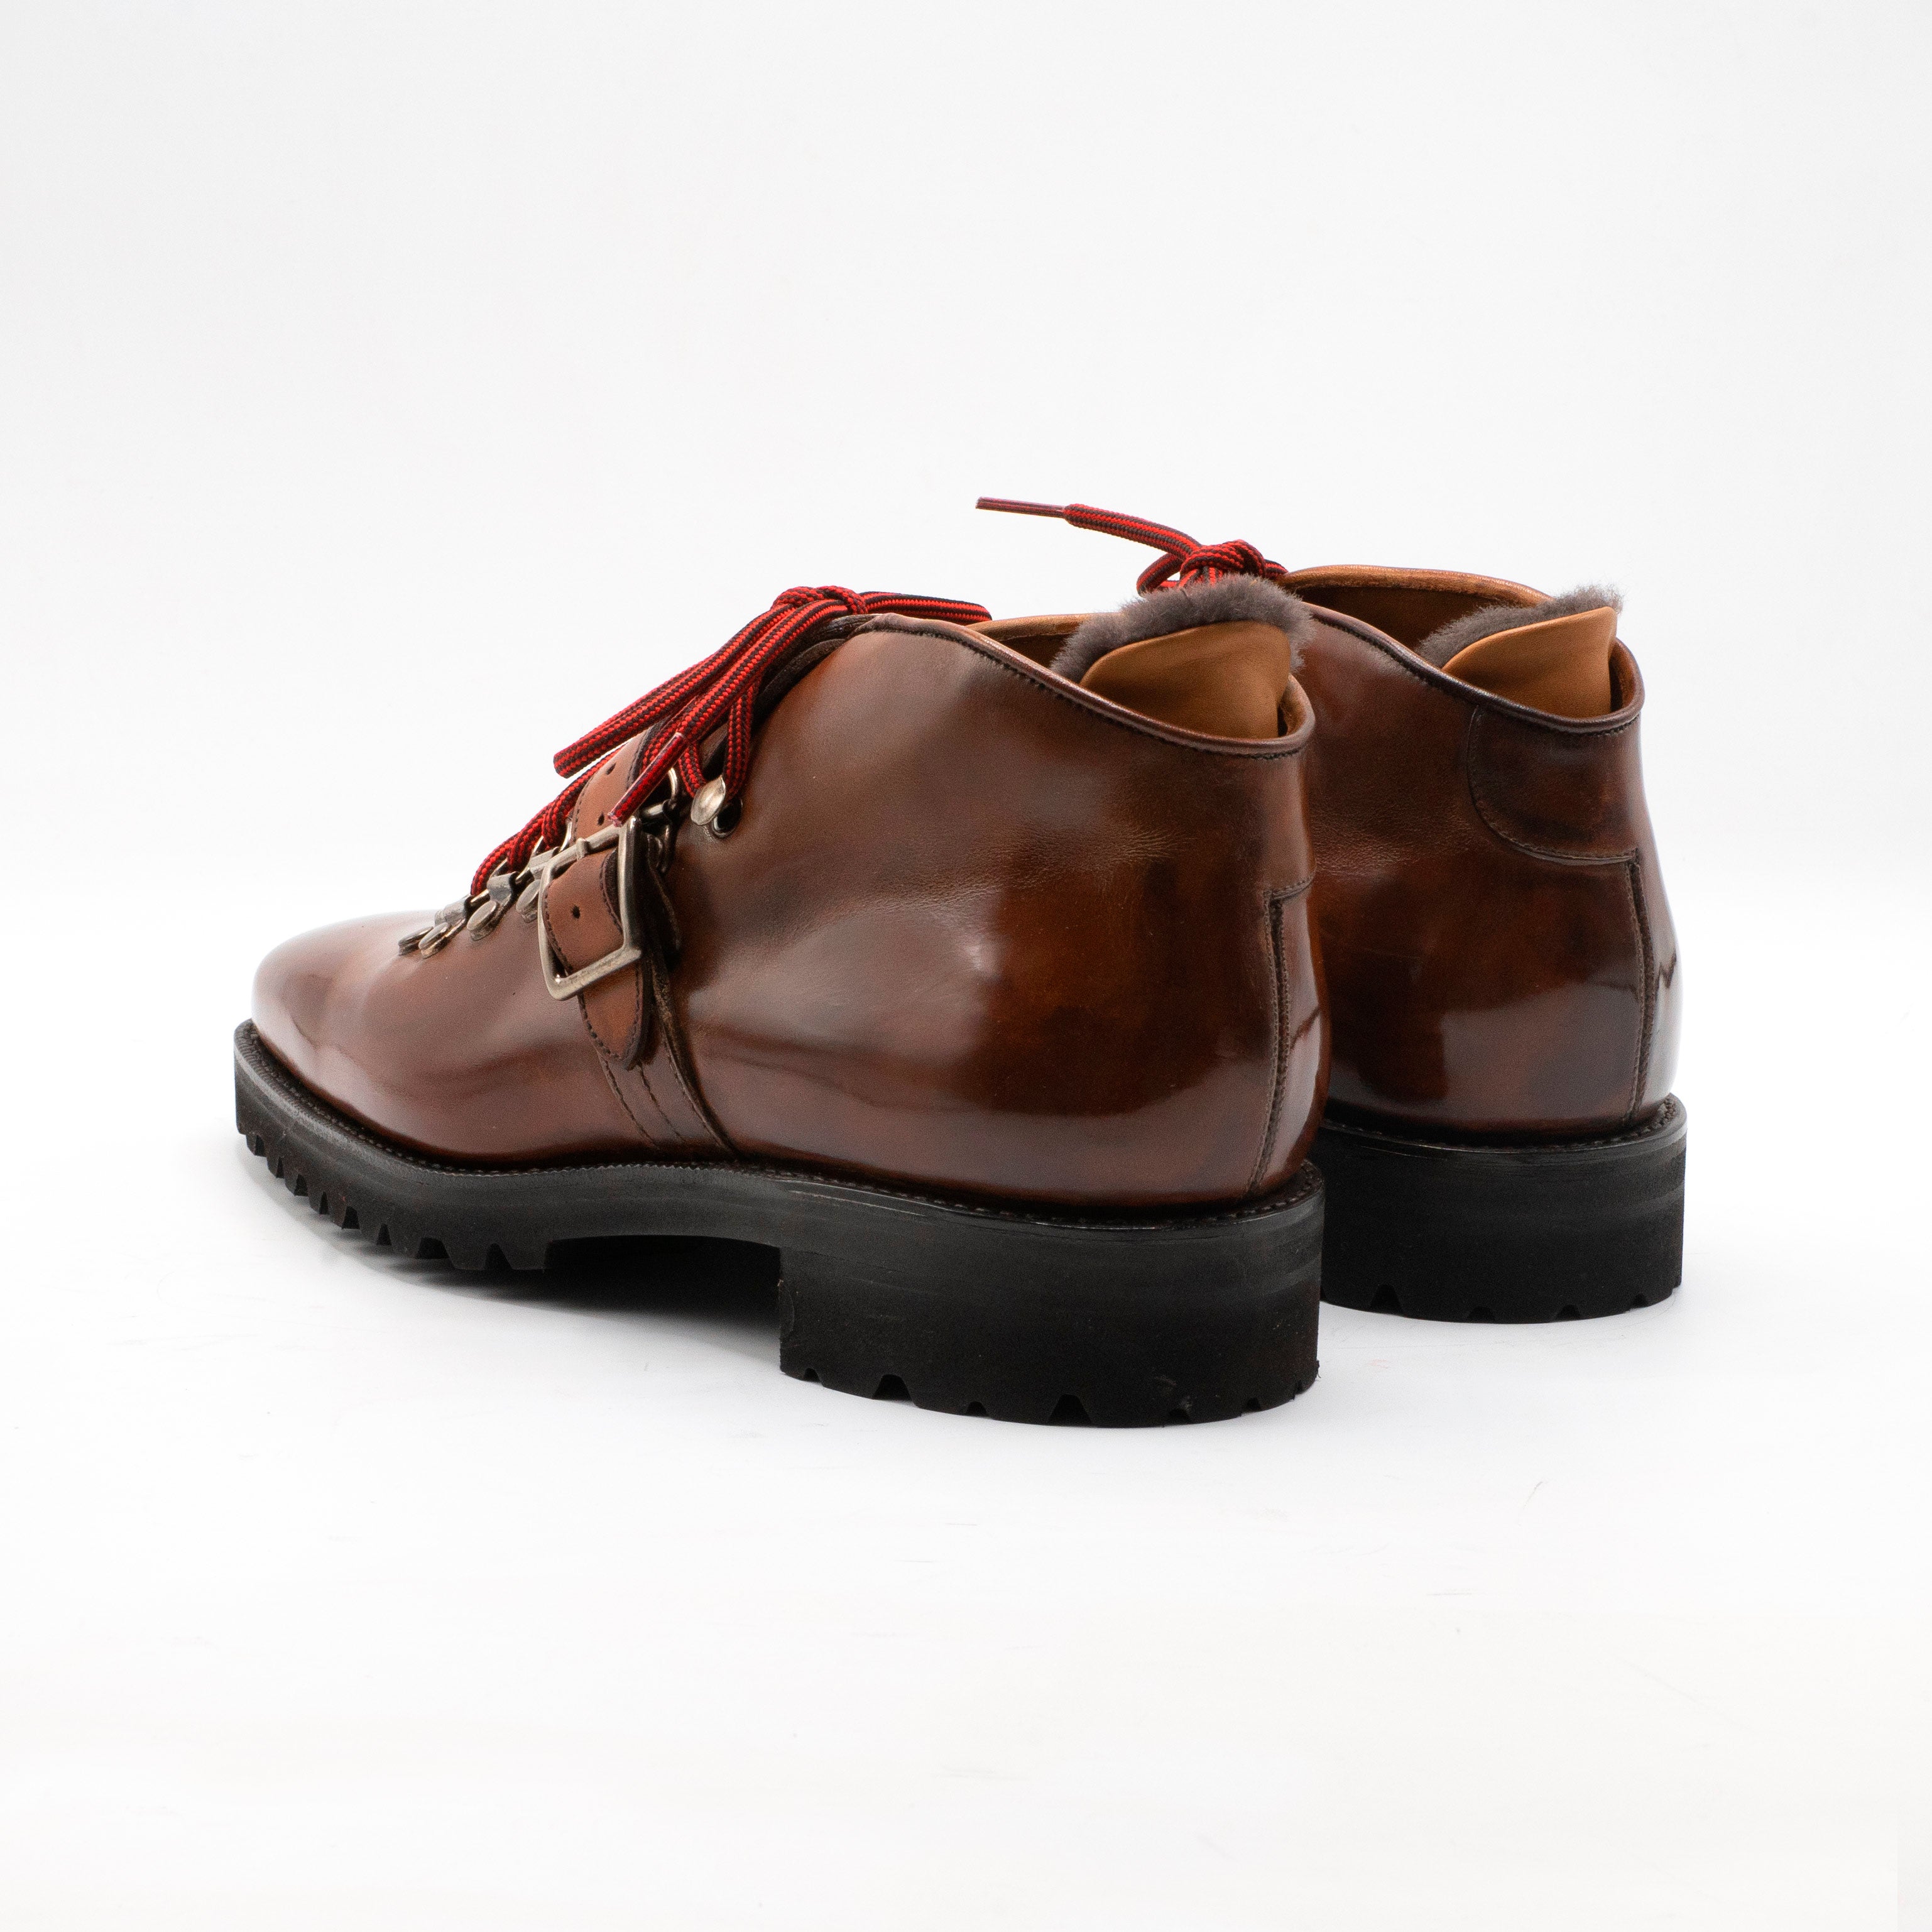 Borcego mountain boot made in Spain by Norman Vilalta